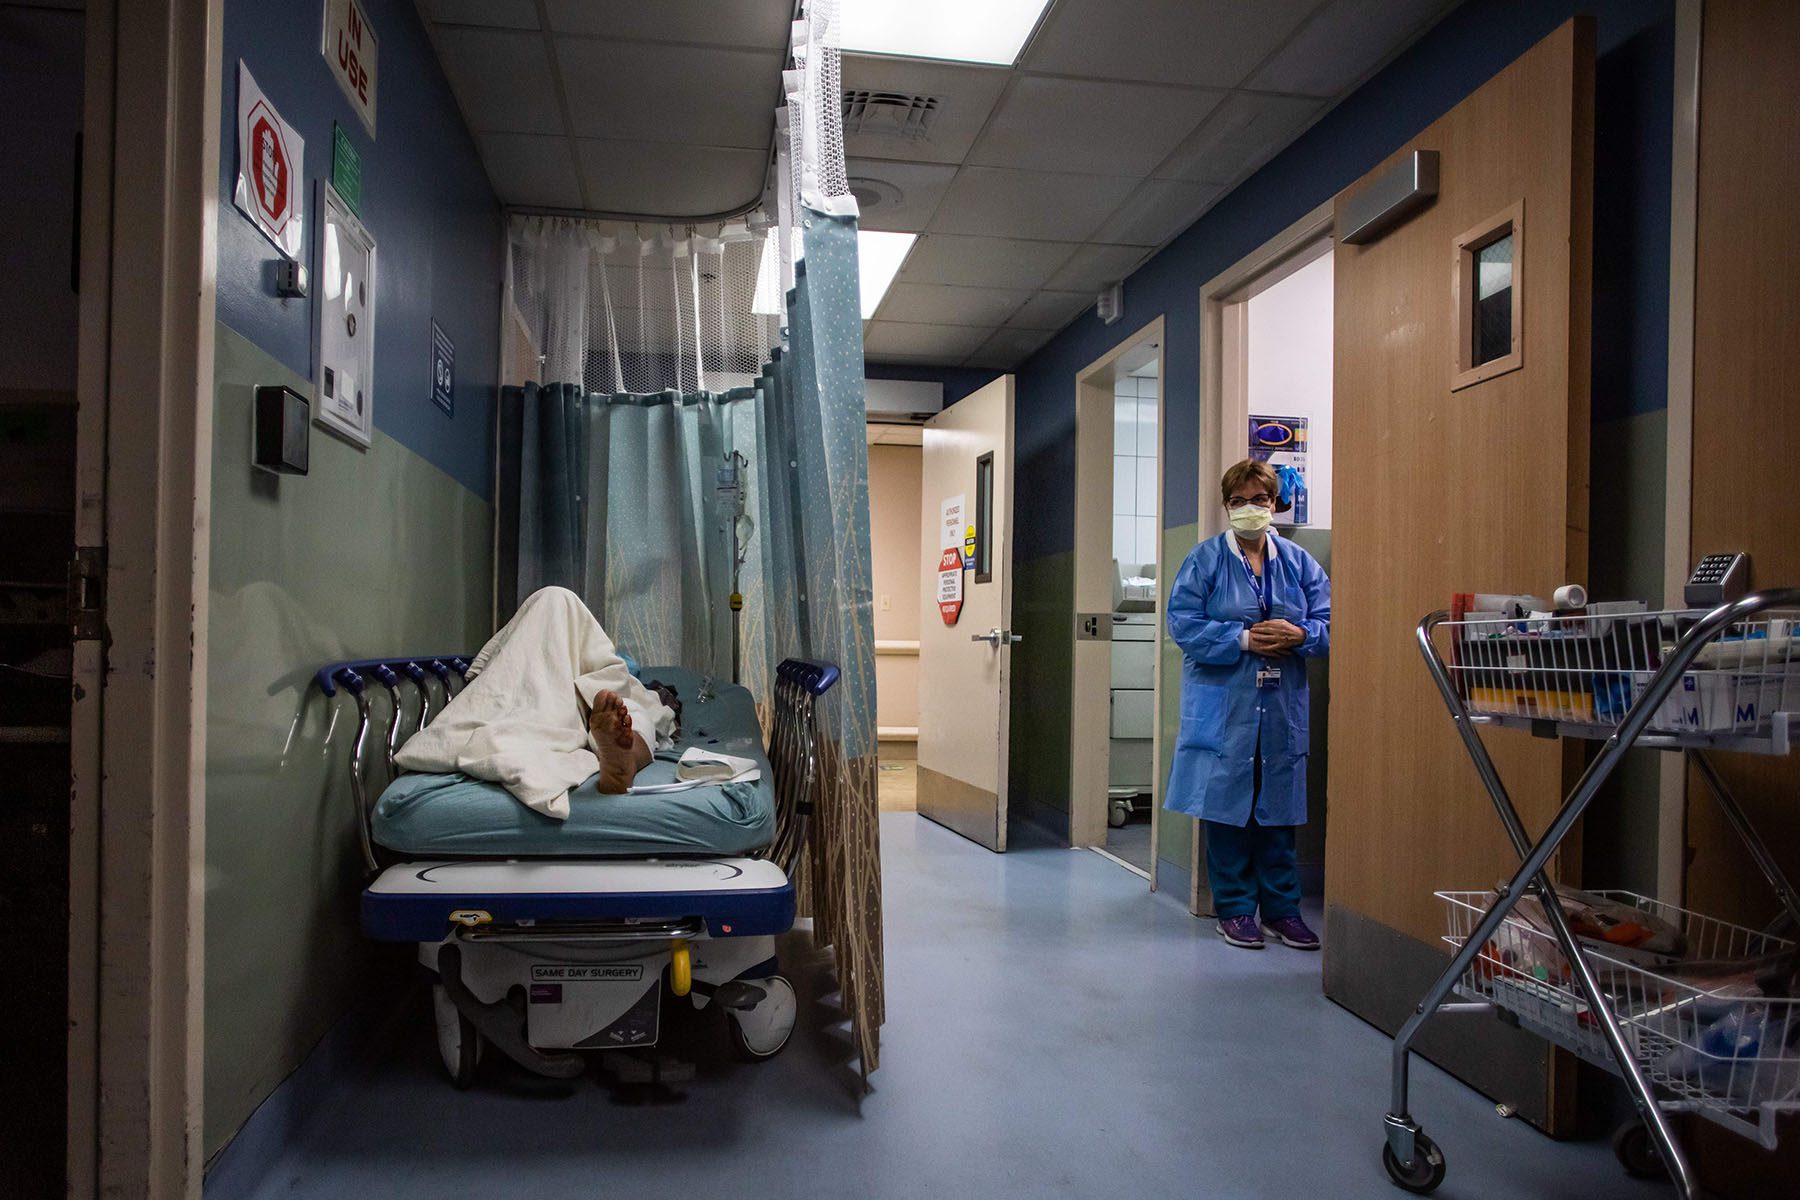 A nurse attends to a patient while he waits for a room.